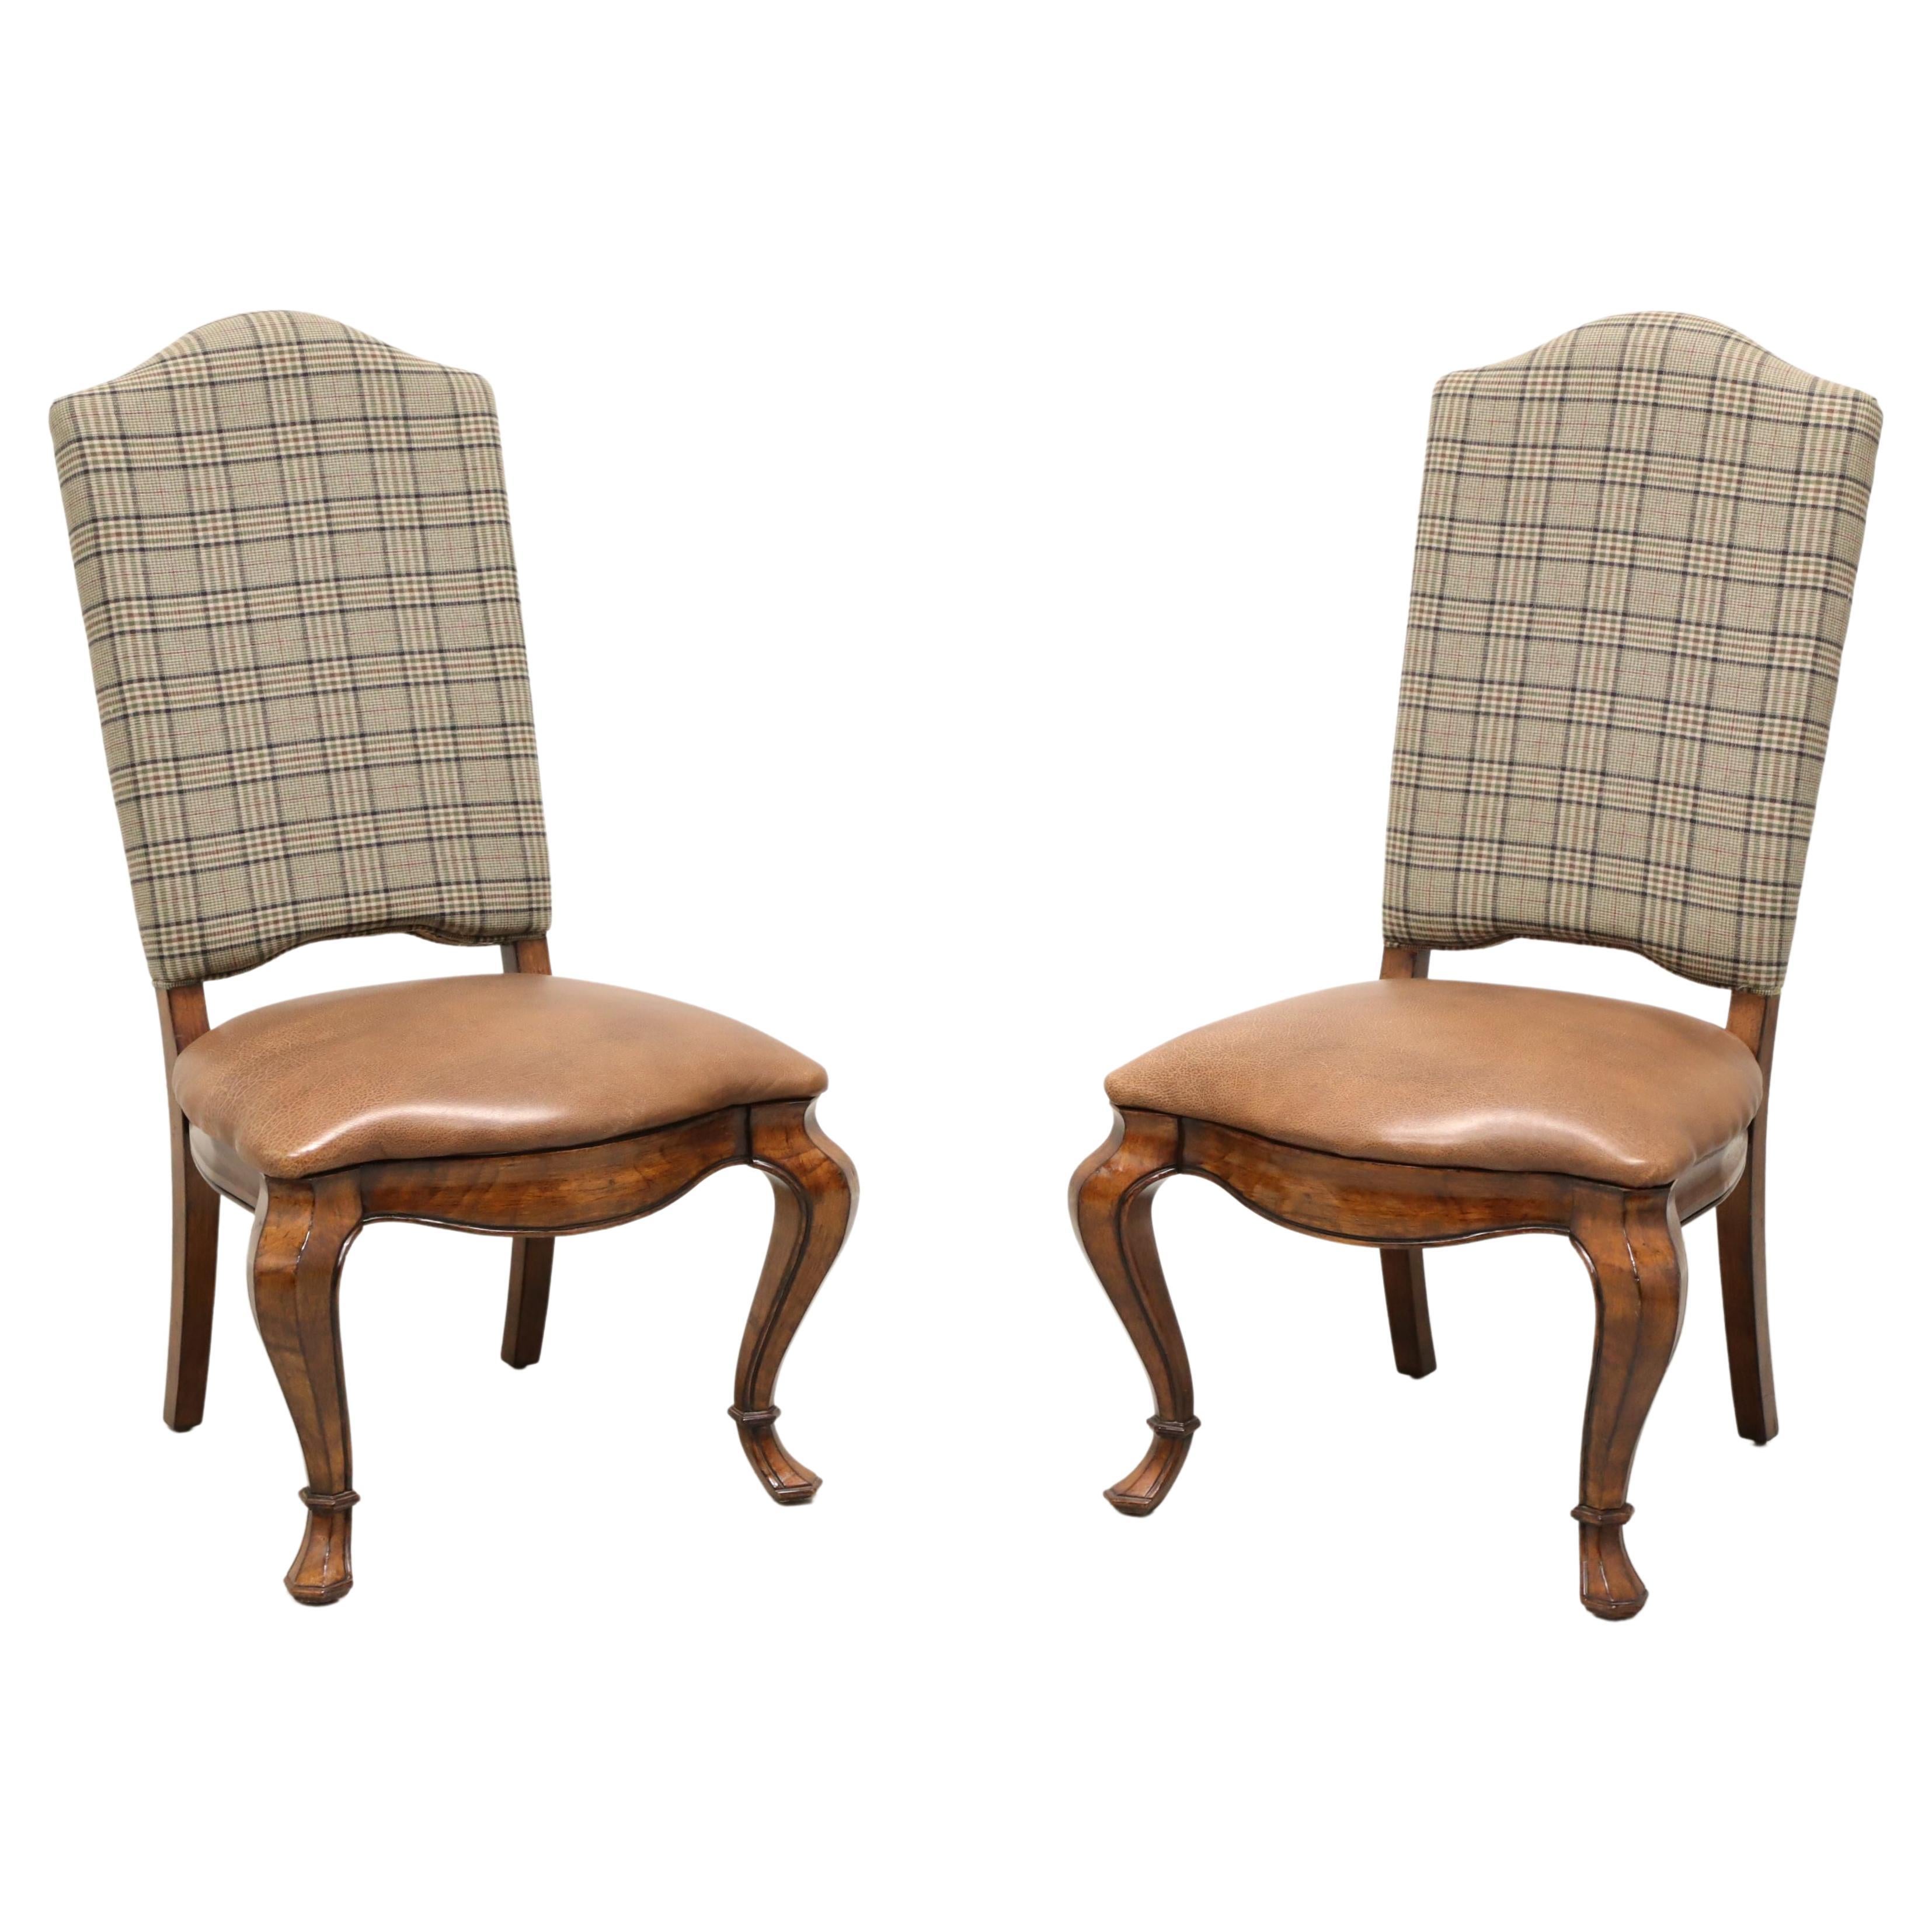 21st Century French Country High Back Accent Side Chairs - Pair